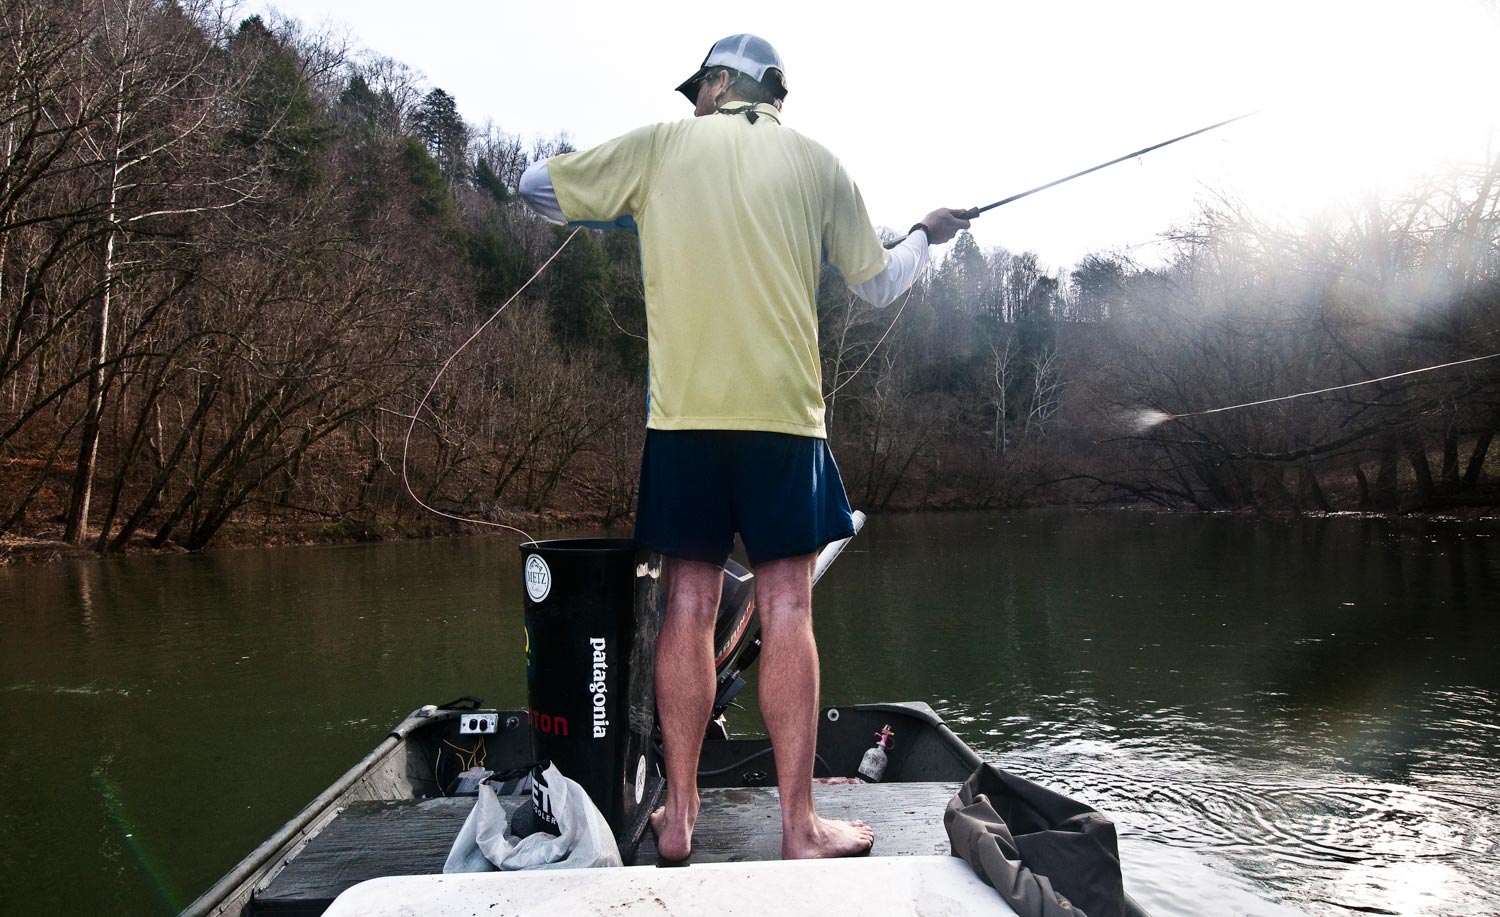 https://www.ginkandgasoline.com/wp-content/uploads/2013/03/fly-fishing-in-boxers.jpeg